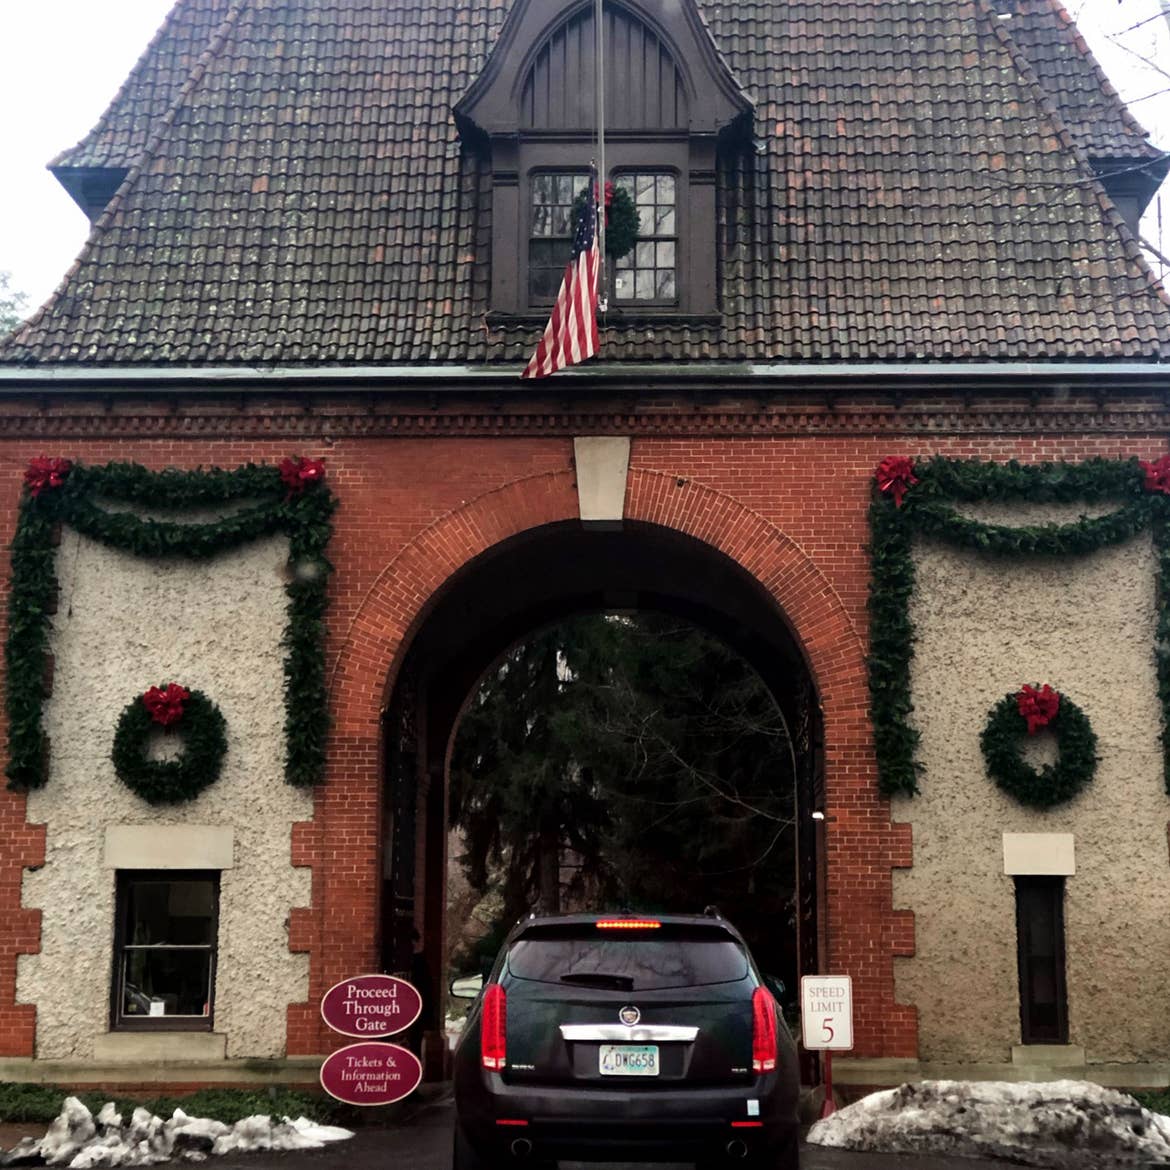 The exterior of the Biltmore Estate entrance under a cloudy sky with lush green garland decorating the facade as a black SUV enters.